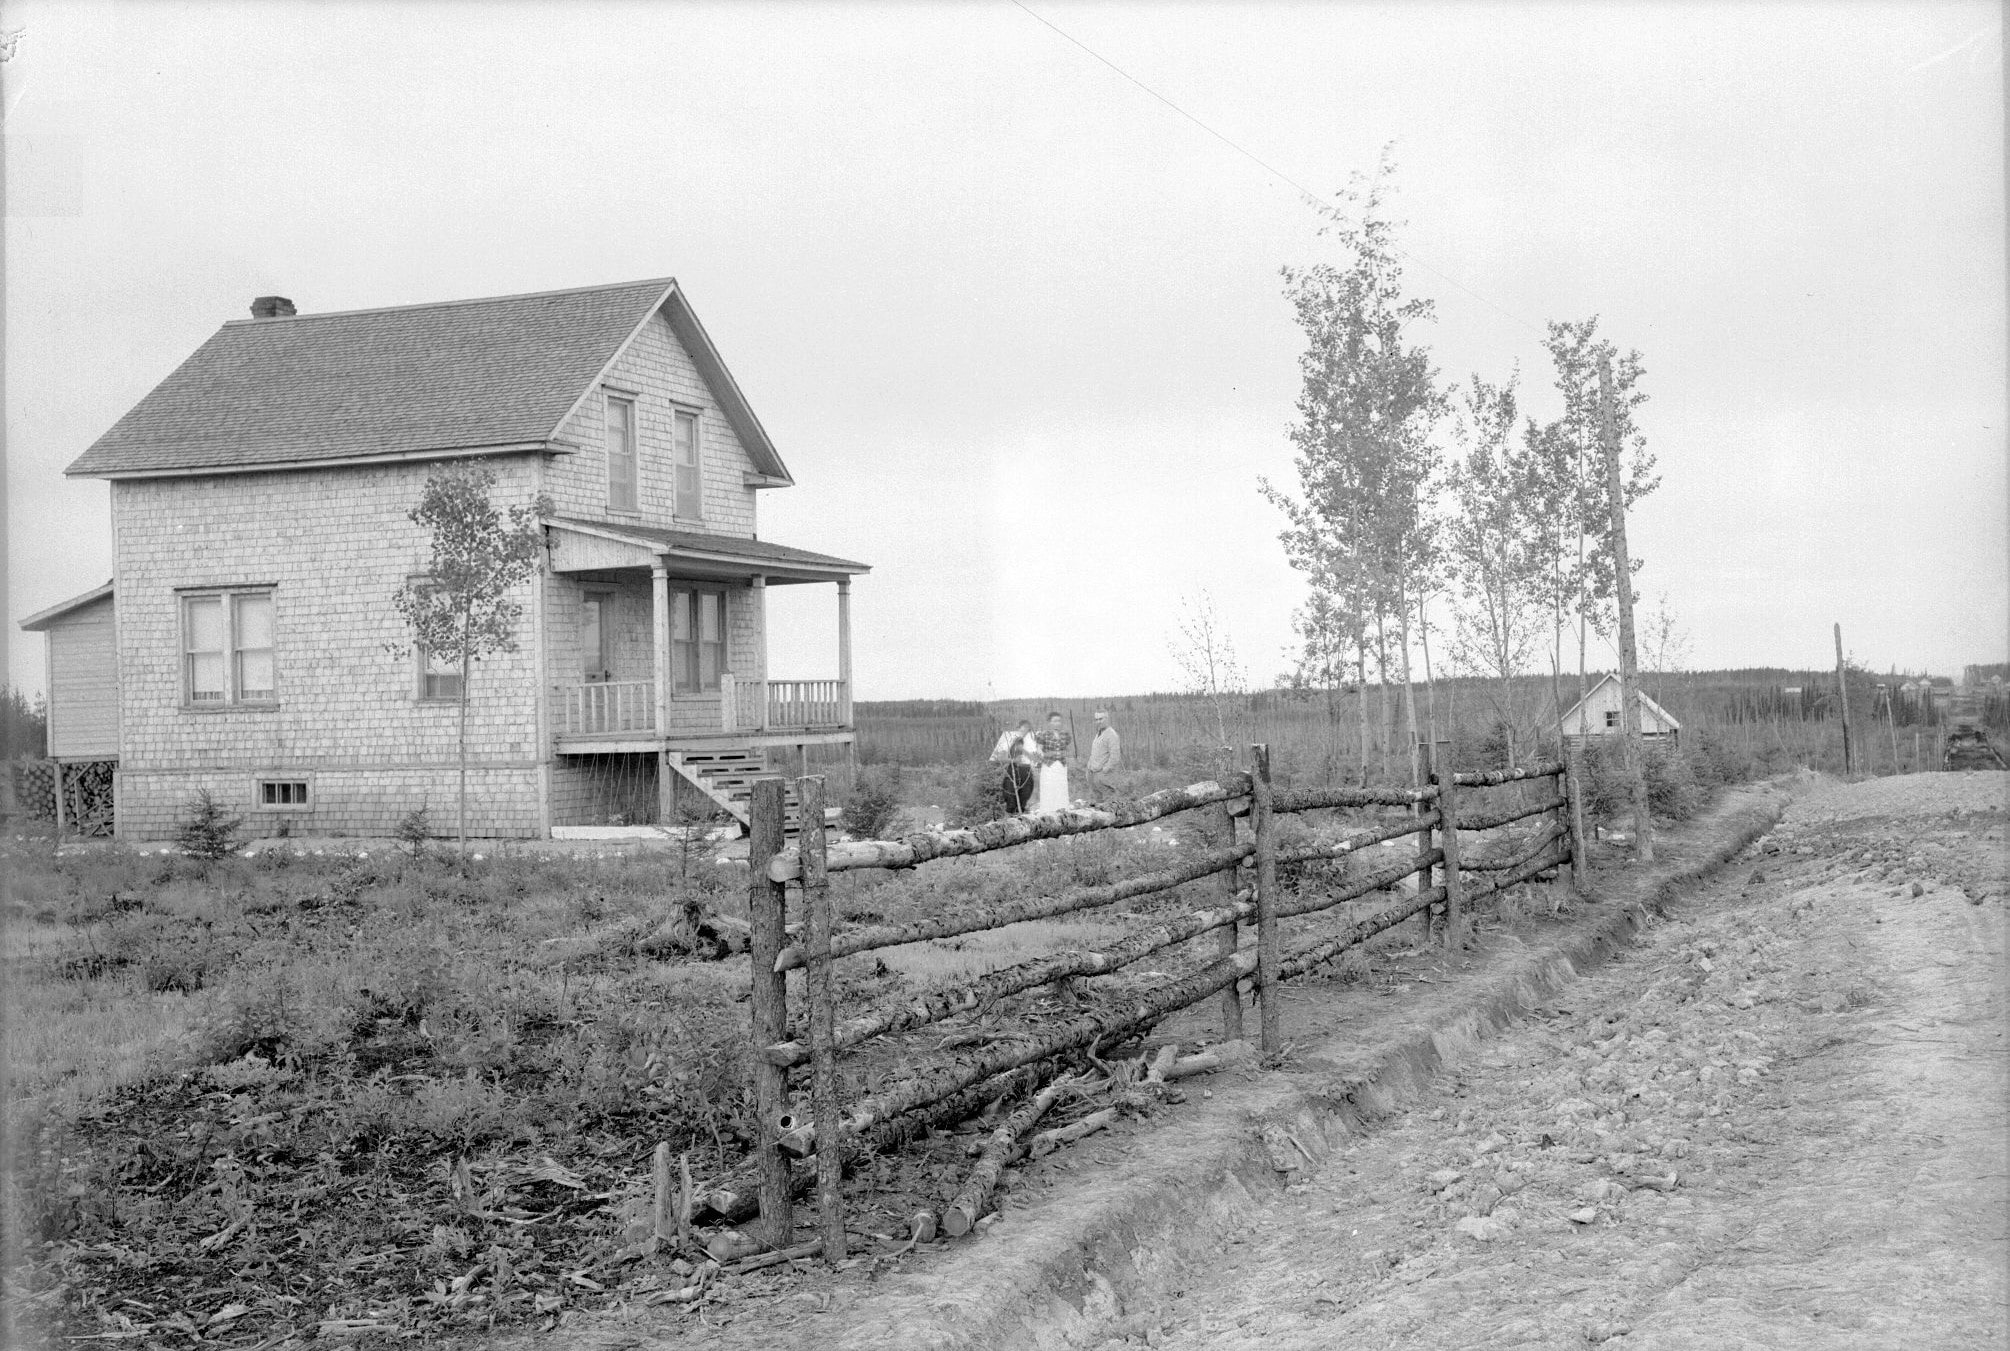 Black and white photograph of a two-storey house with three people posing in front of it. In the foreground, a fence. In the background, a small cluster of houses.